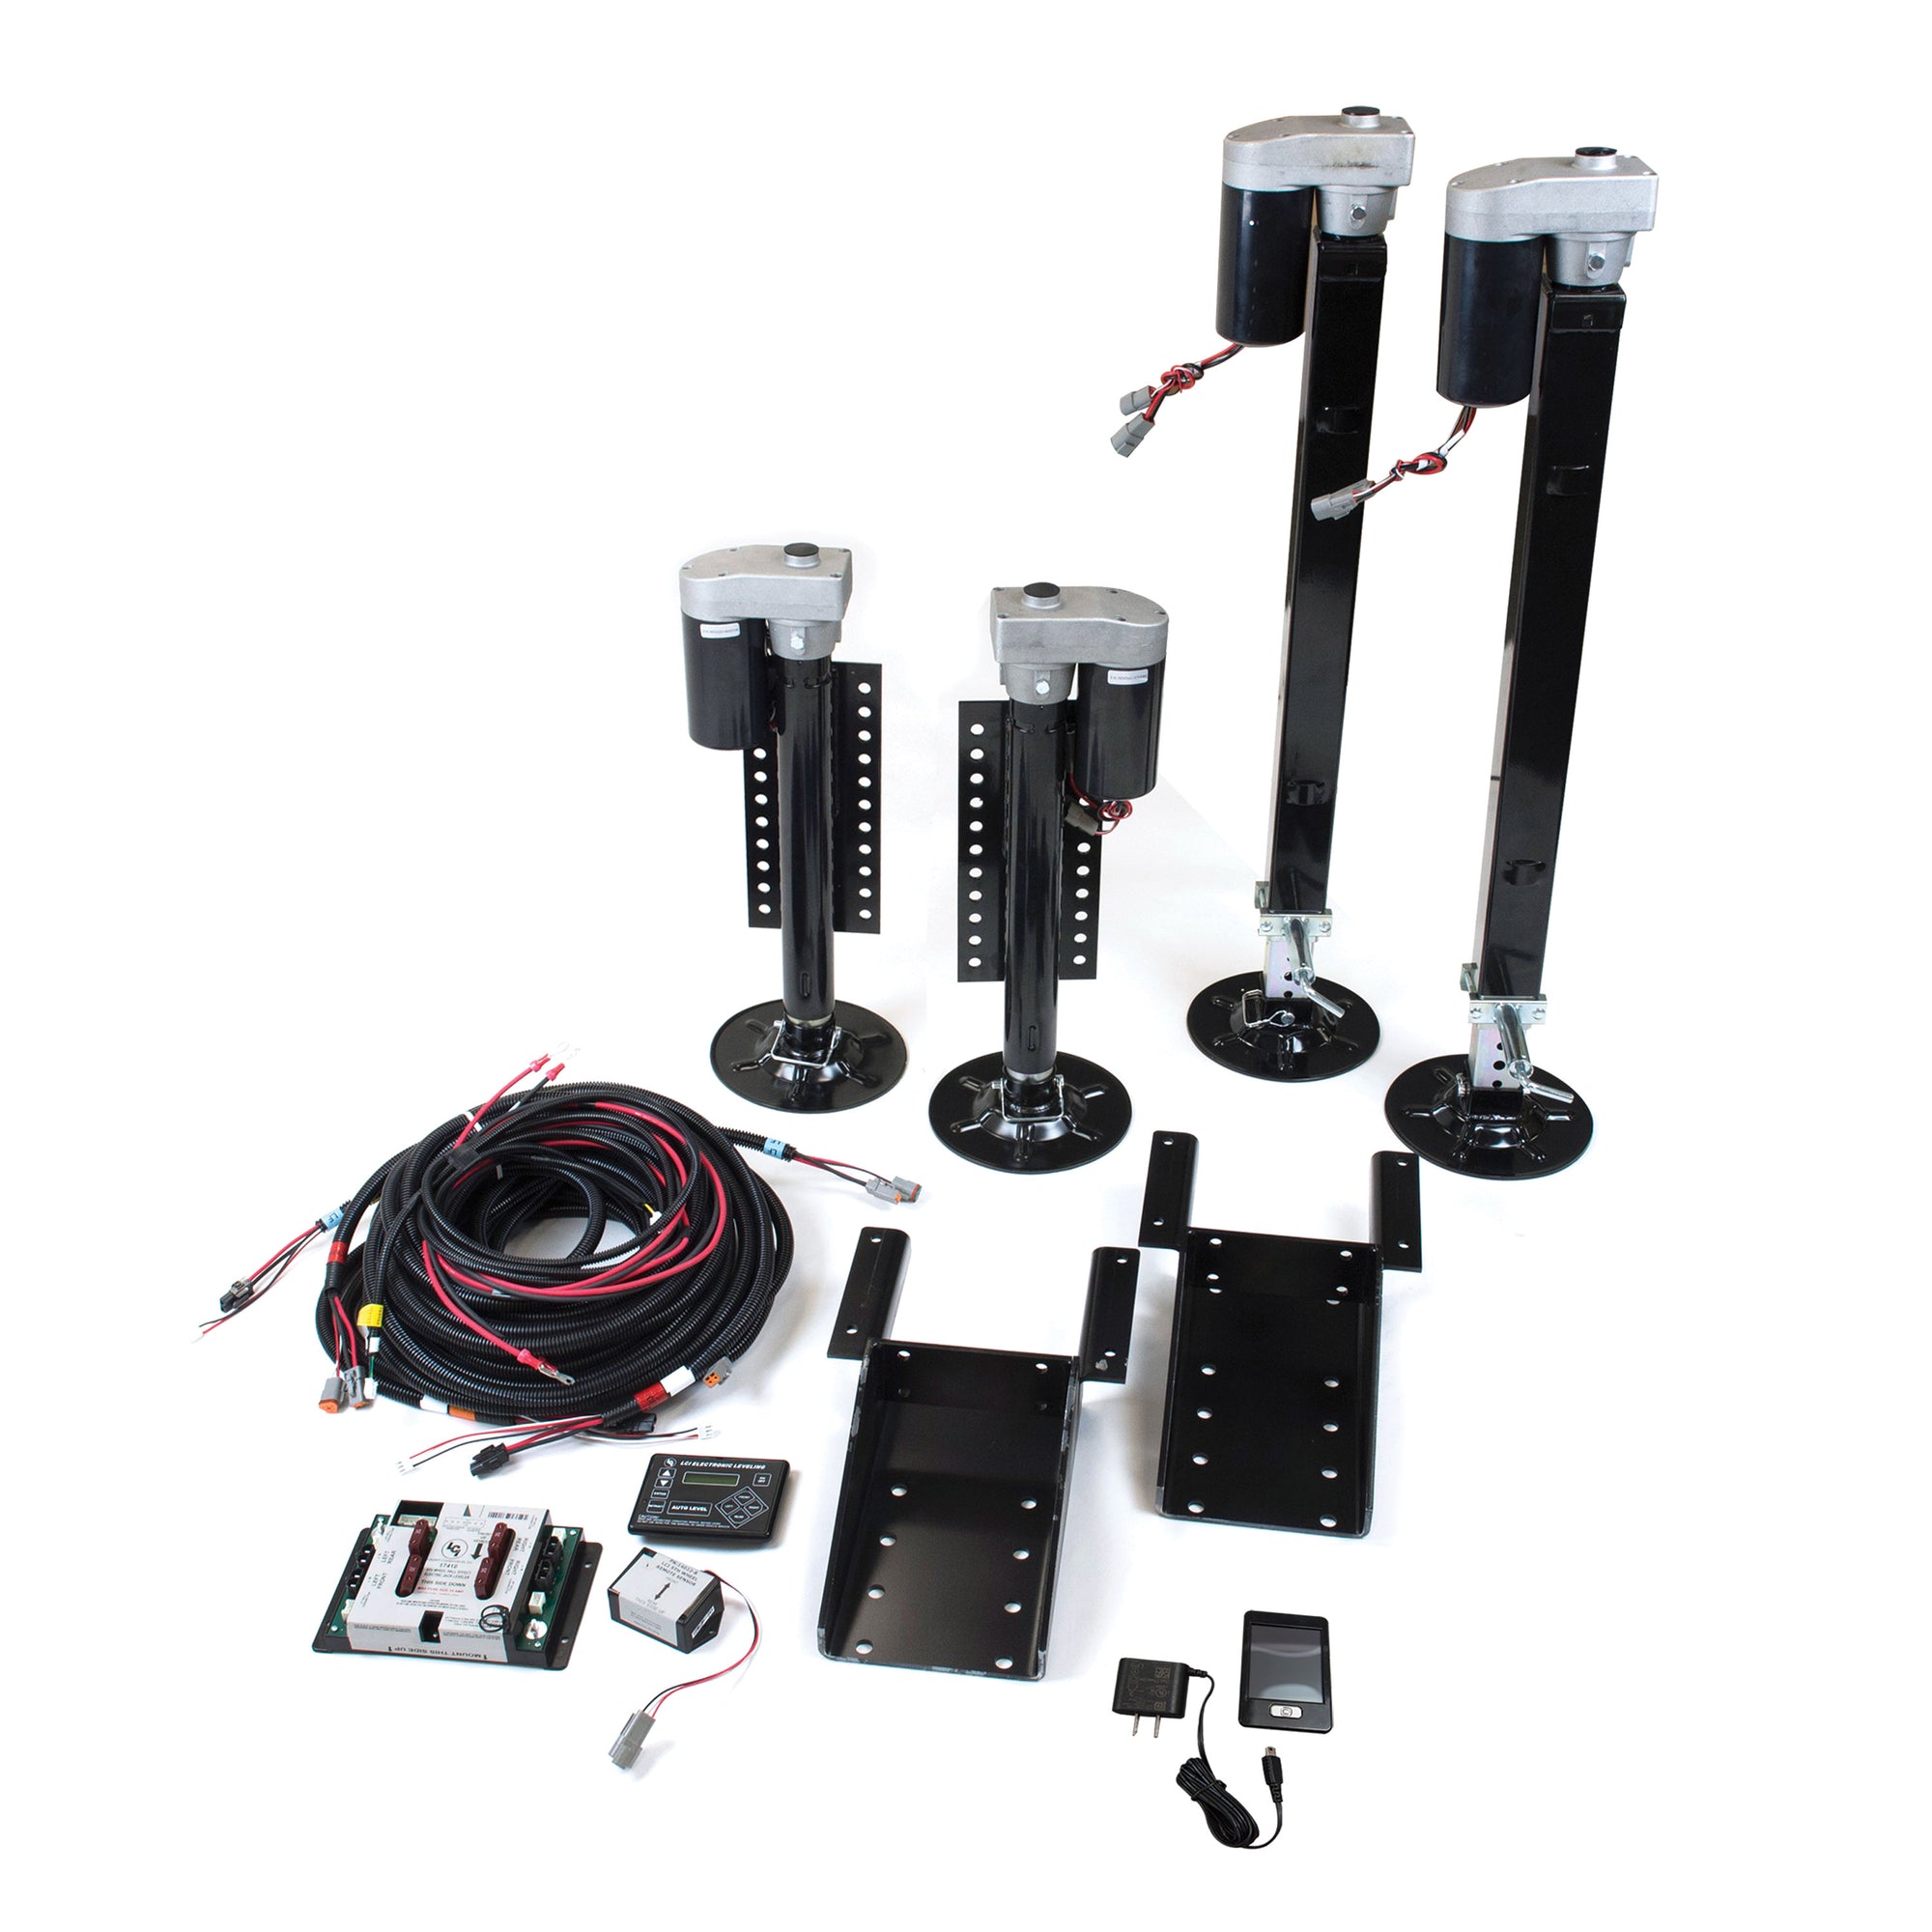 Lippert 358590 Ground Control 12V Wireless Electric RV Leveling System, 5th Wheel